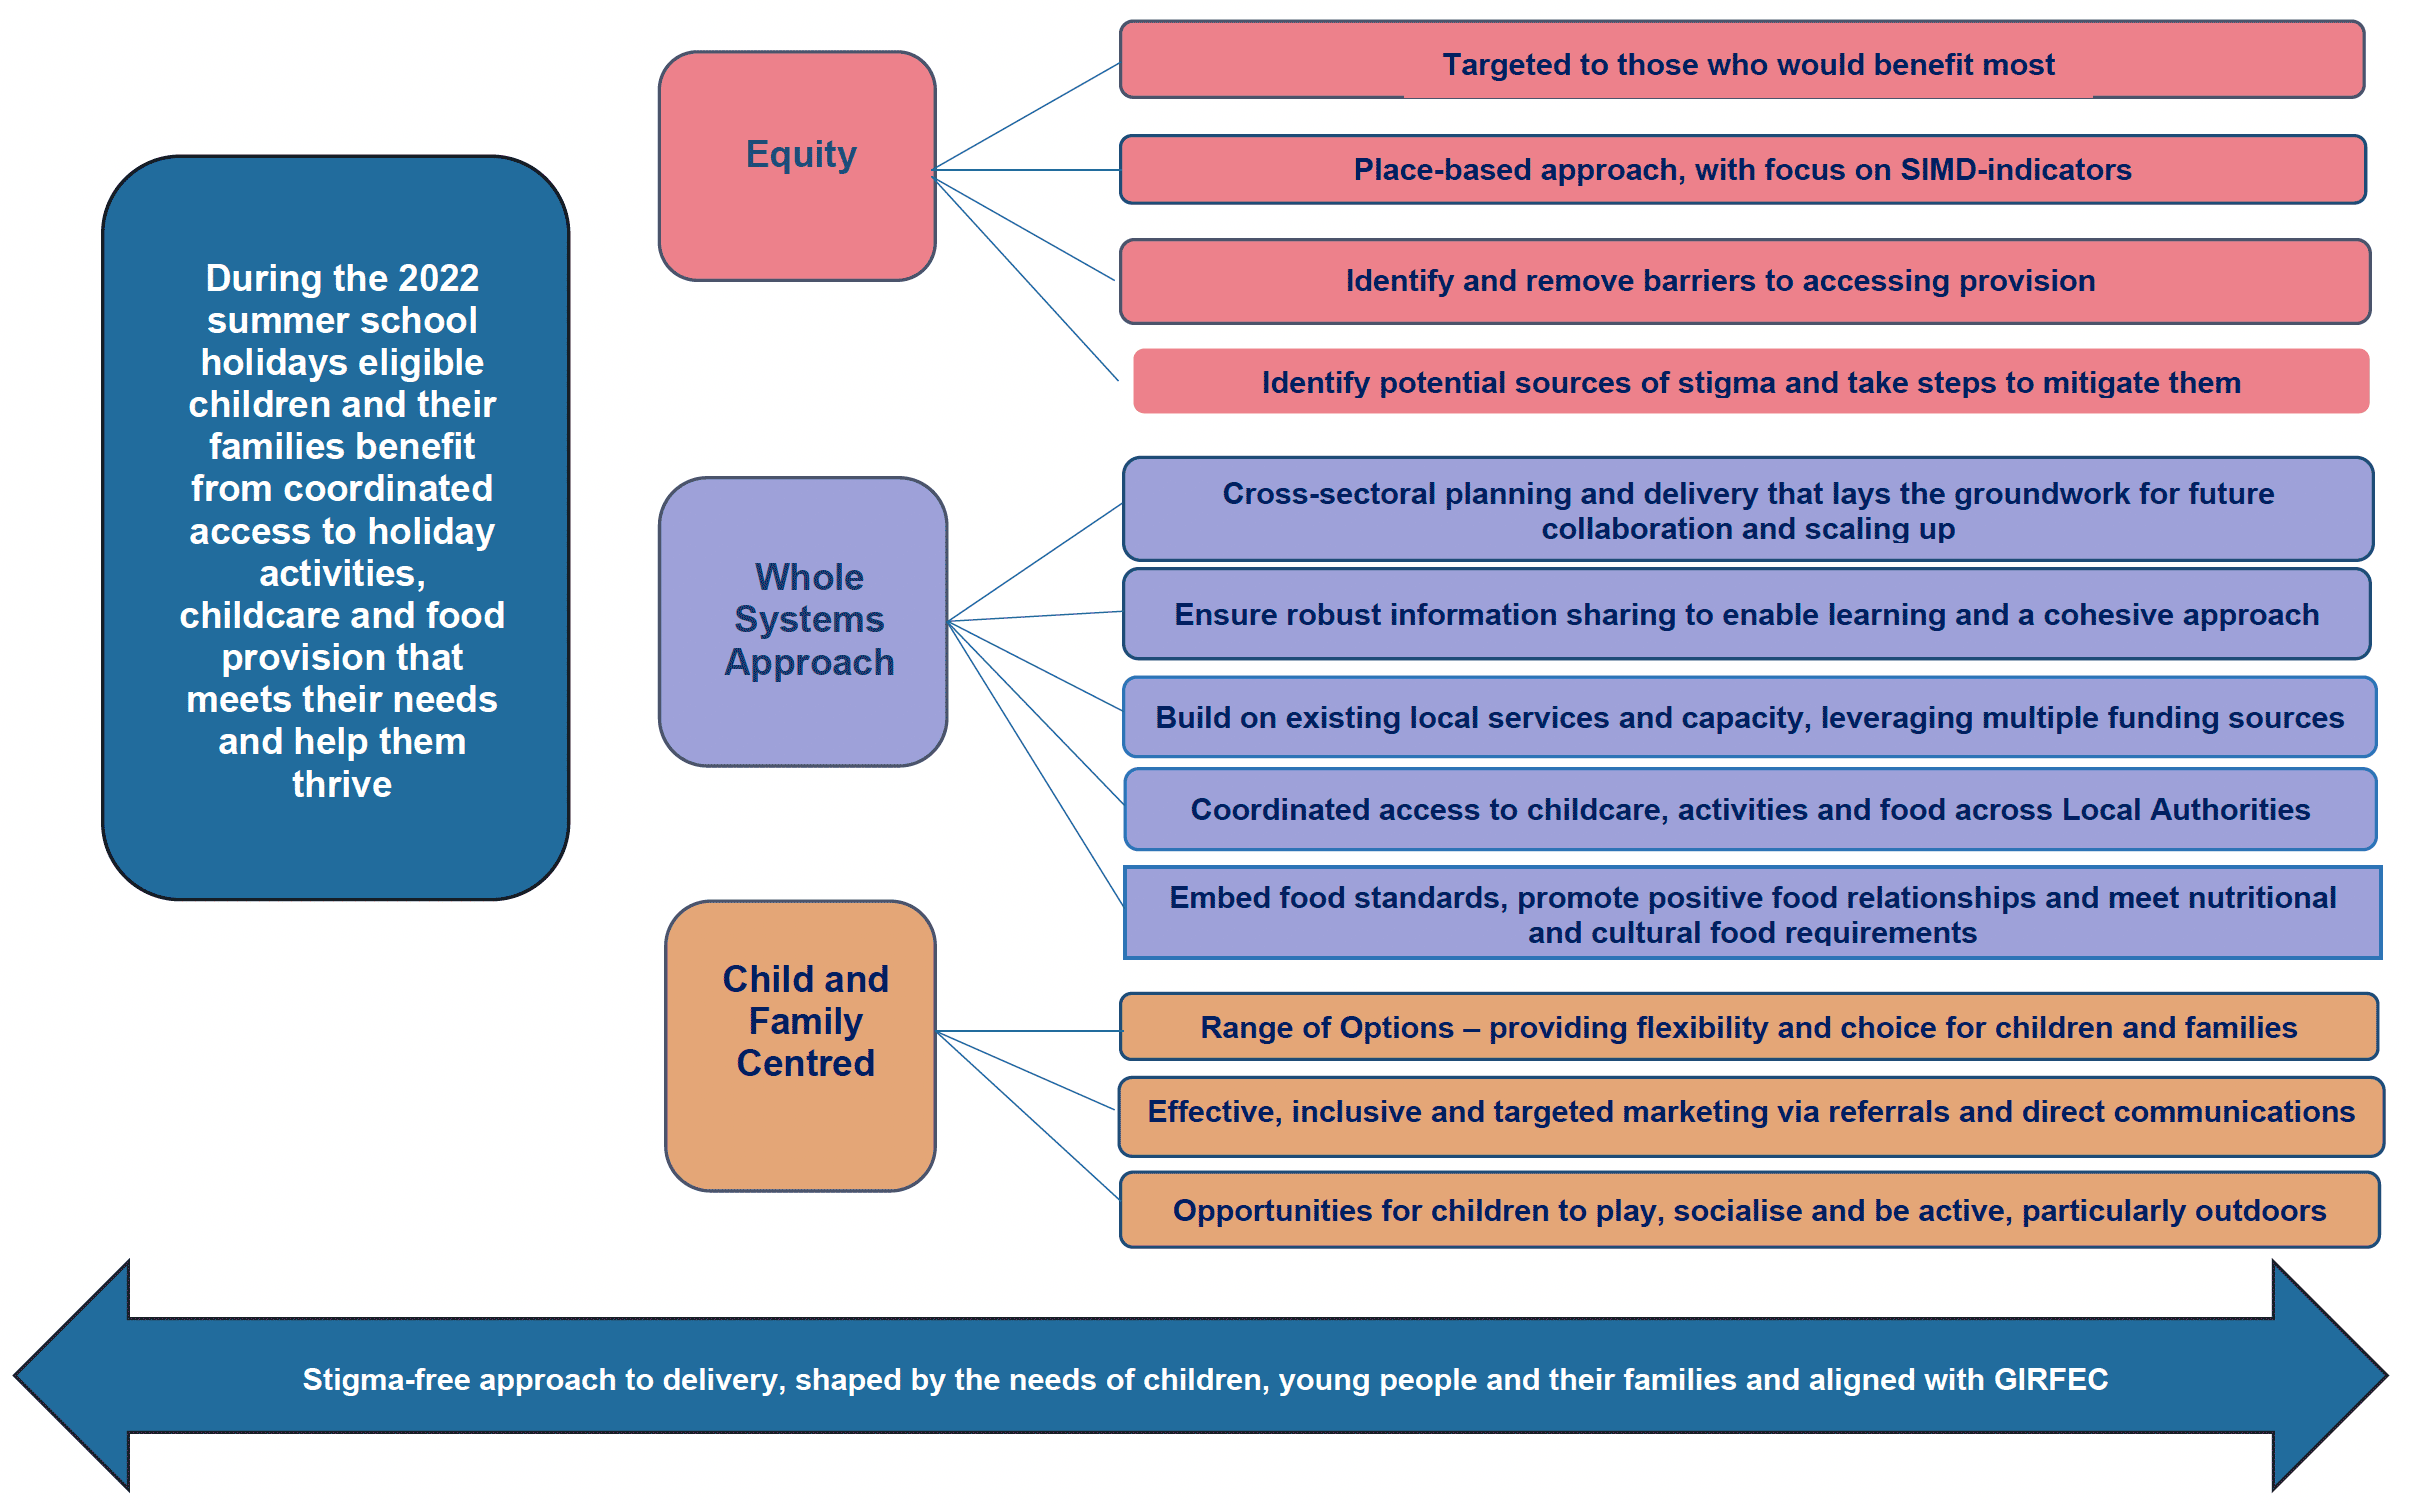 Drivers Diagram, showing aim of the programme, primary and secondary drivers and underlying principles to aid delivery of Summer 2022. 
Summer 2022 aims to deliver coordinated childcare activities and food provision by building that upon the principles of equity, whole systems approach, and child and family-centred approach. 